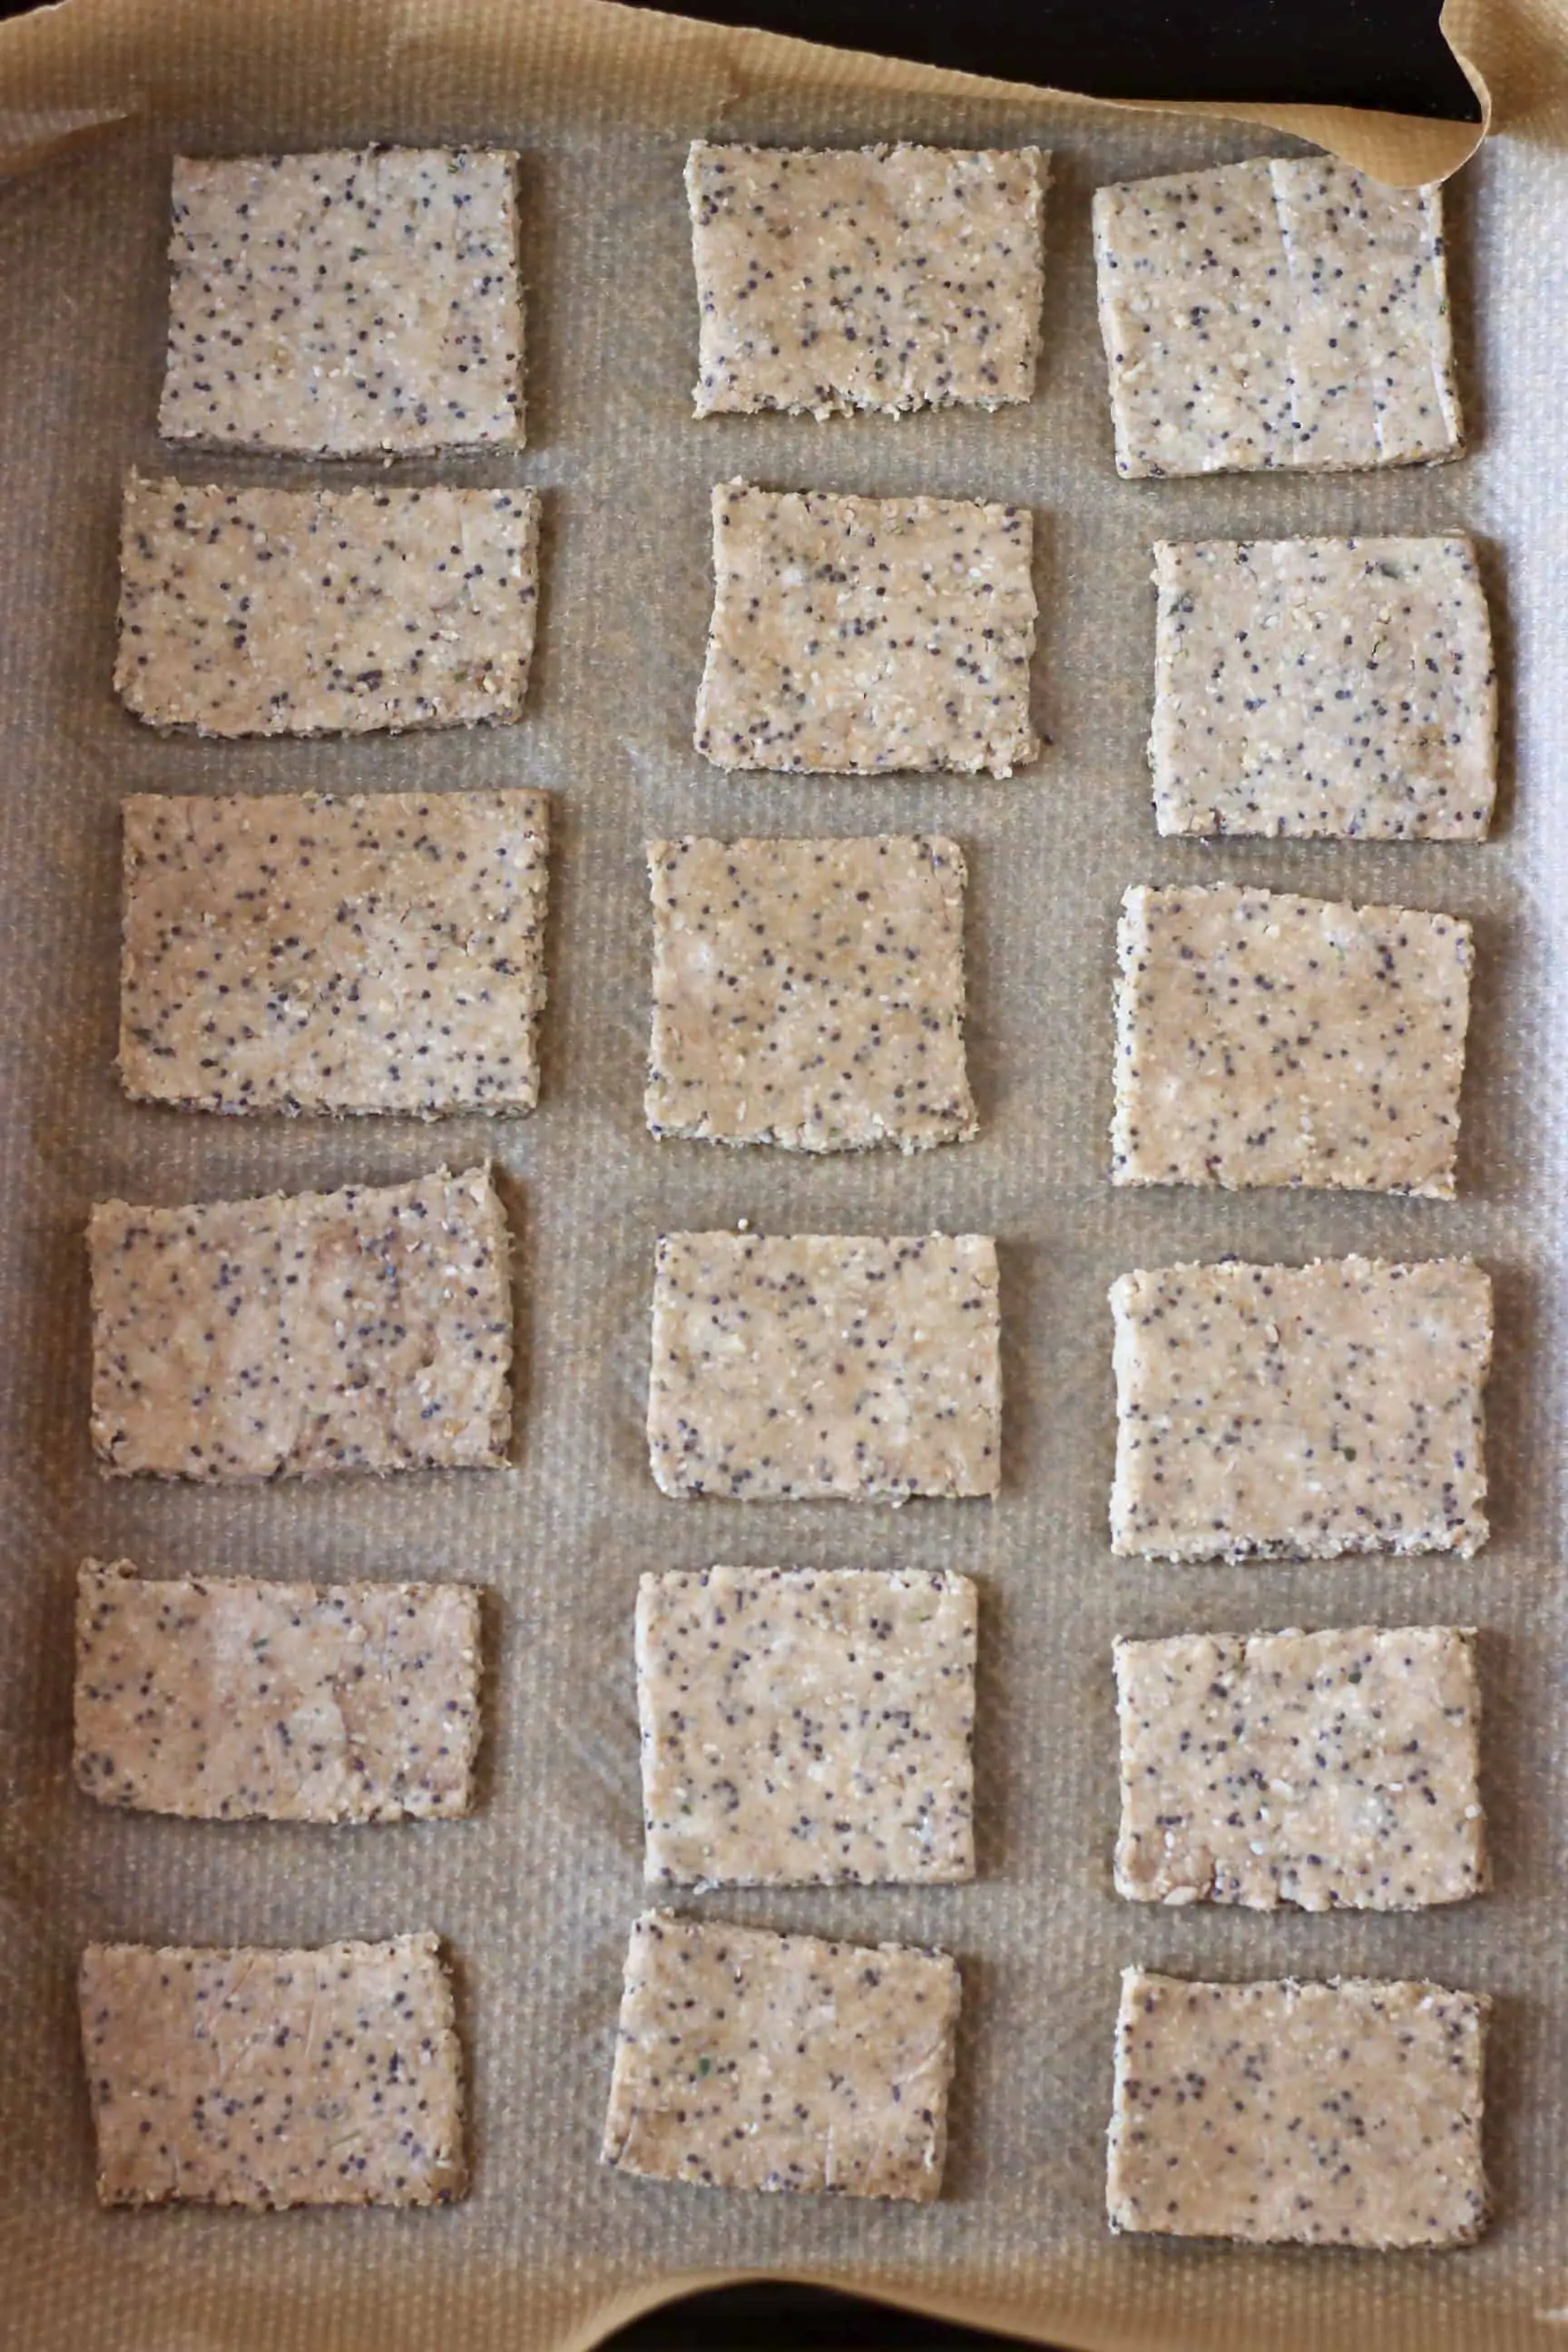 Eighteen square raw gluten-free vegan crackers on a baking tray lined with baking paper